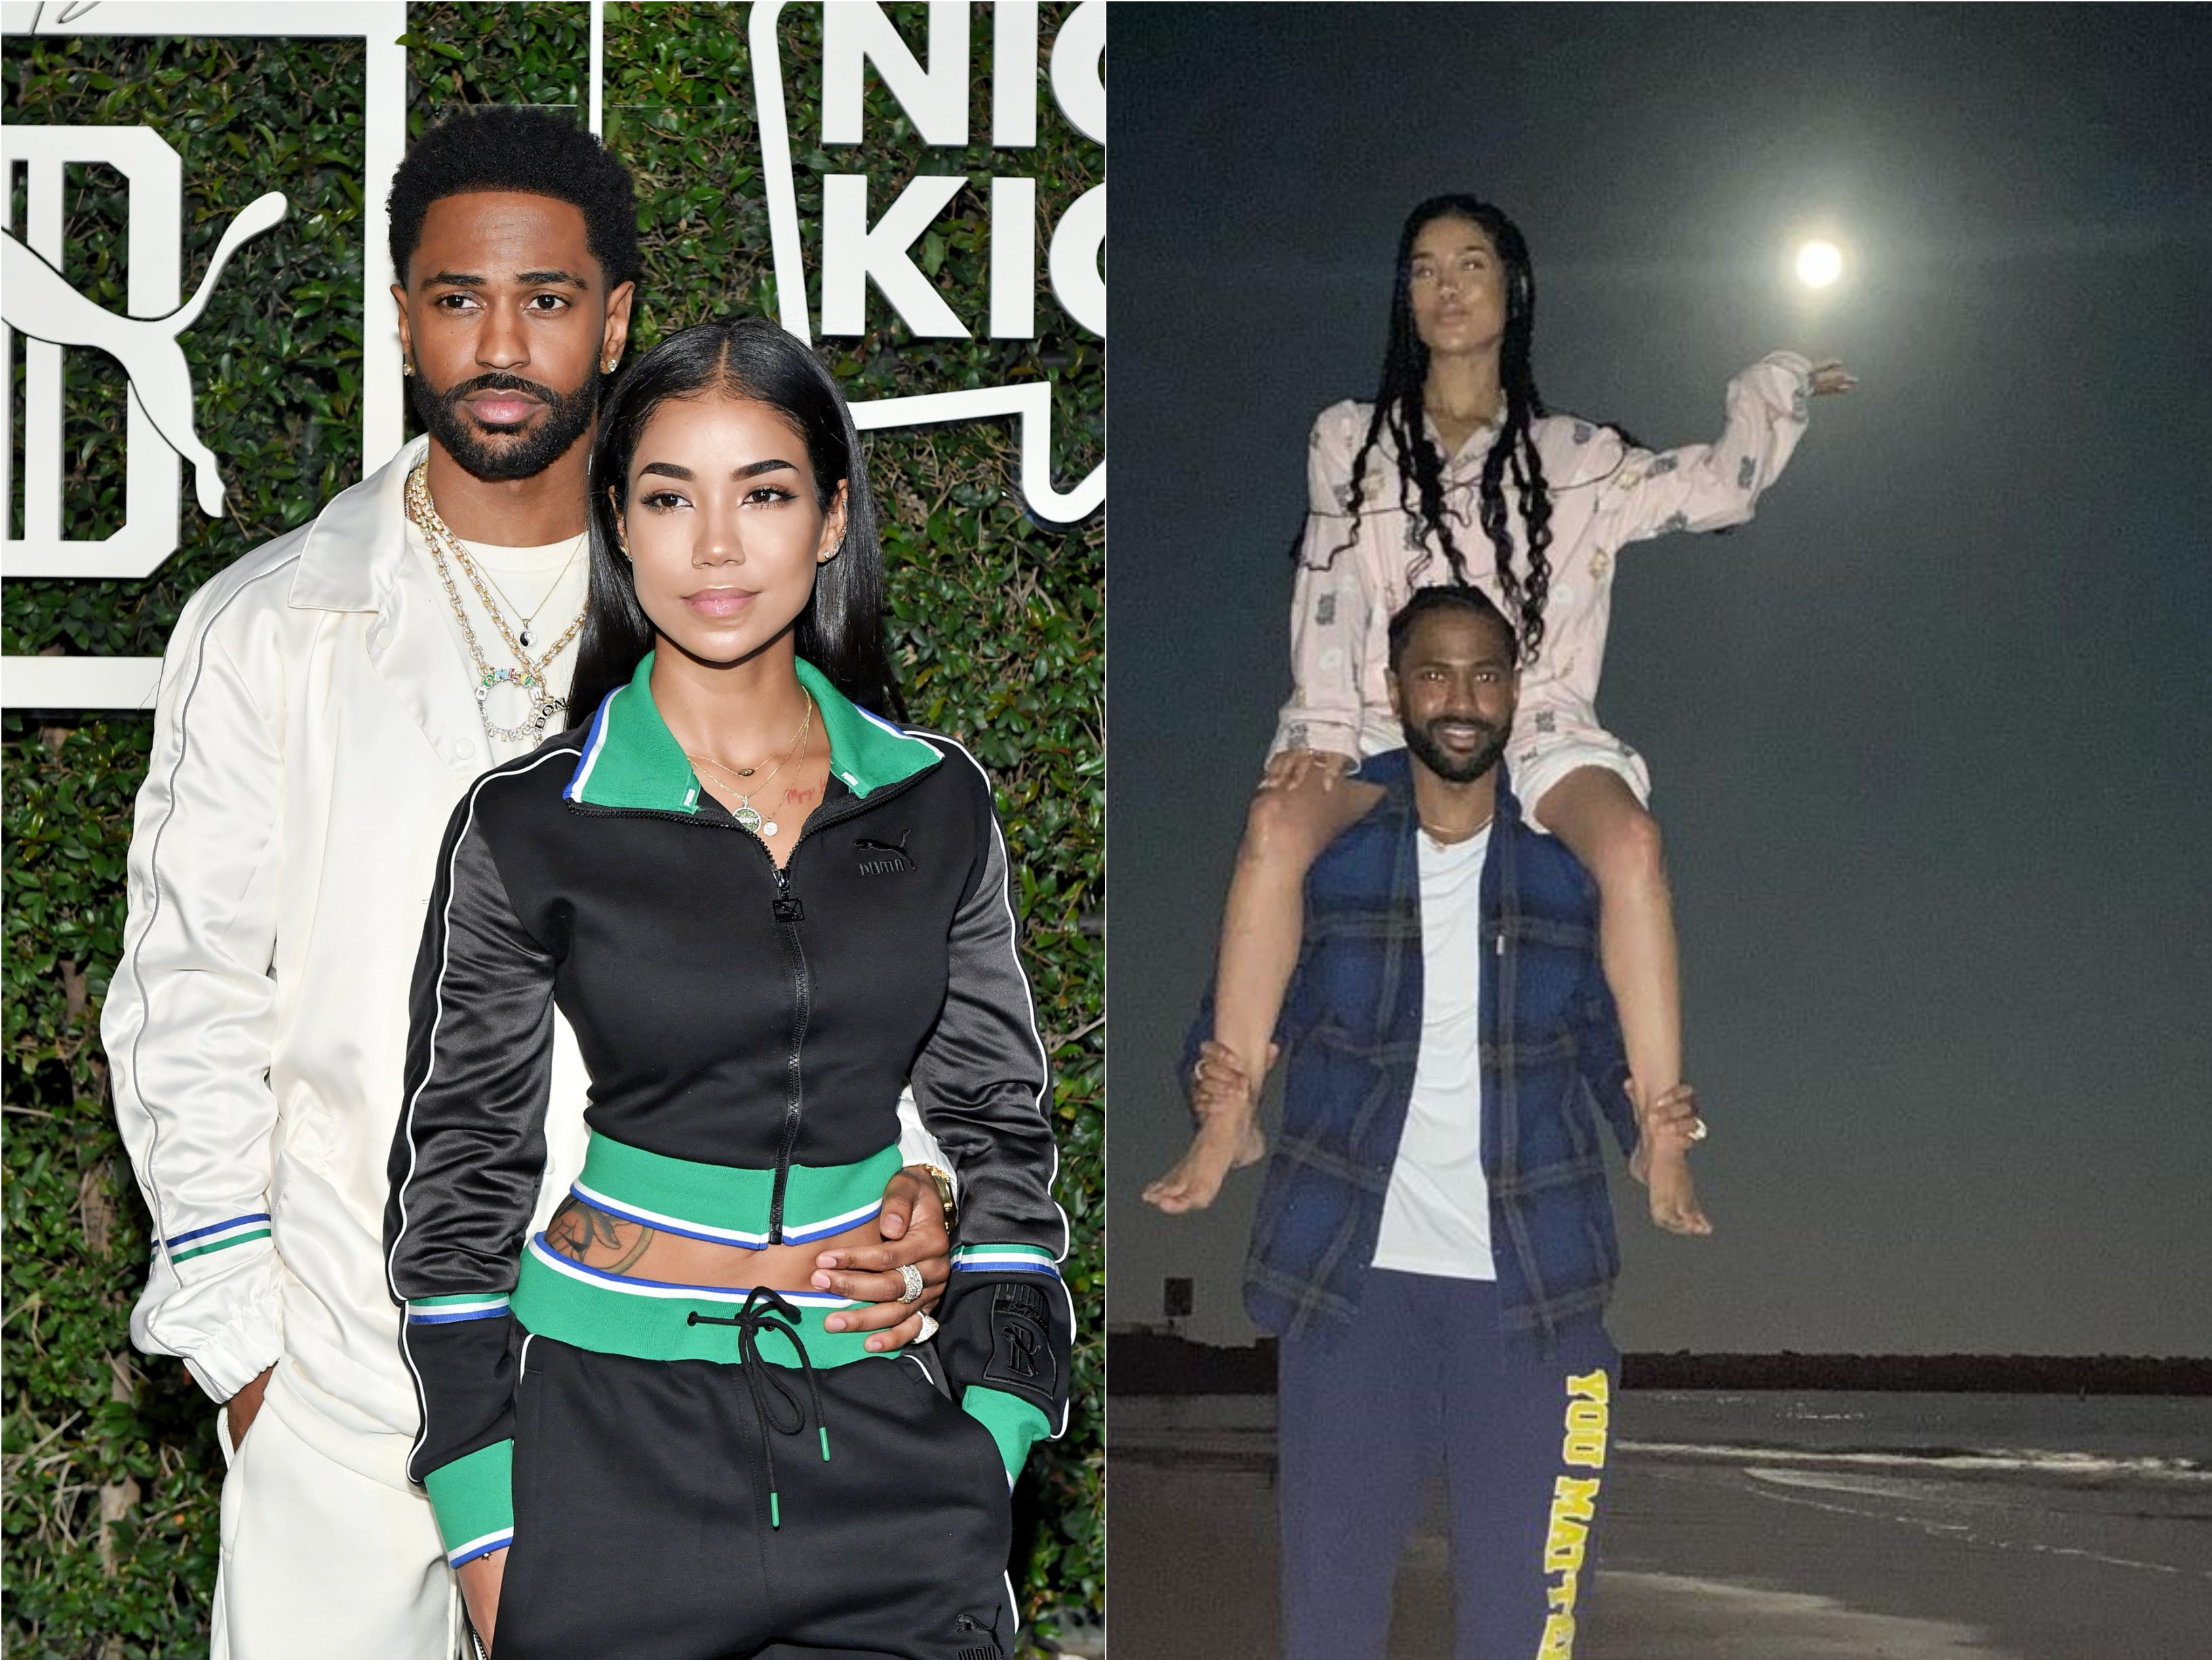 Jhene Aiko and Big Sean are expecting